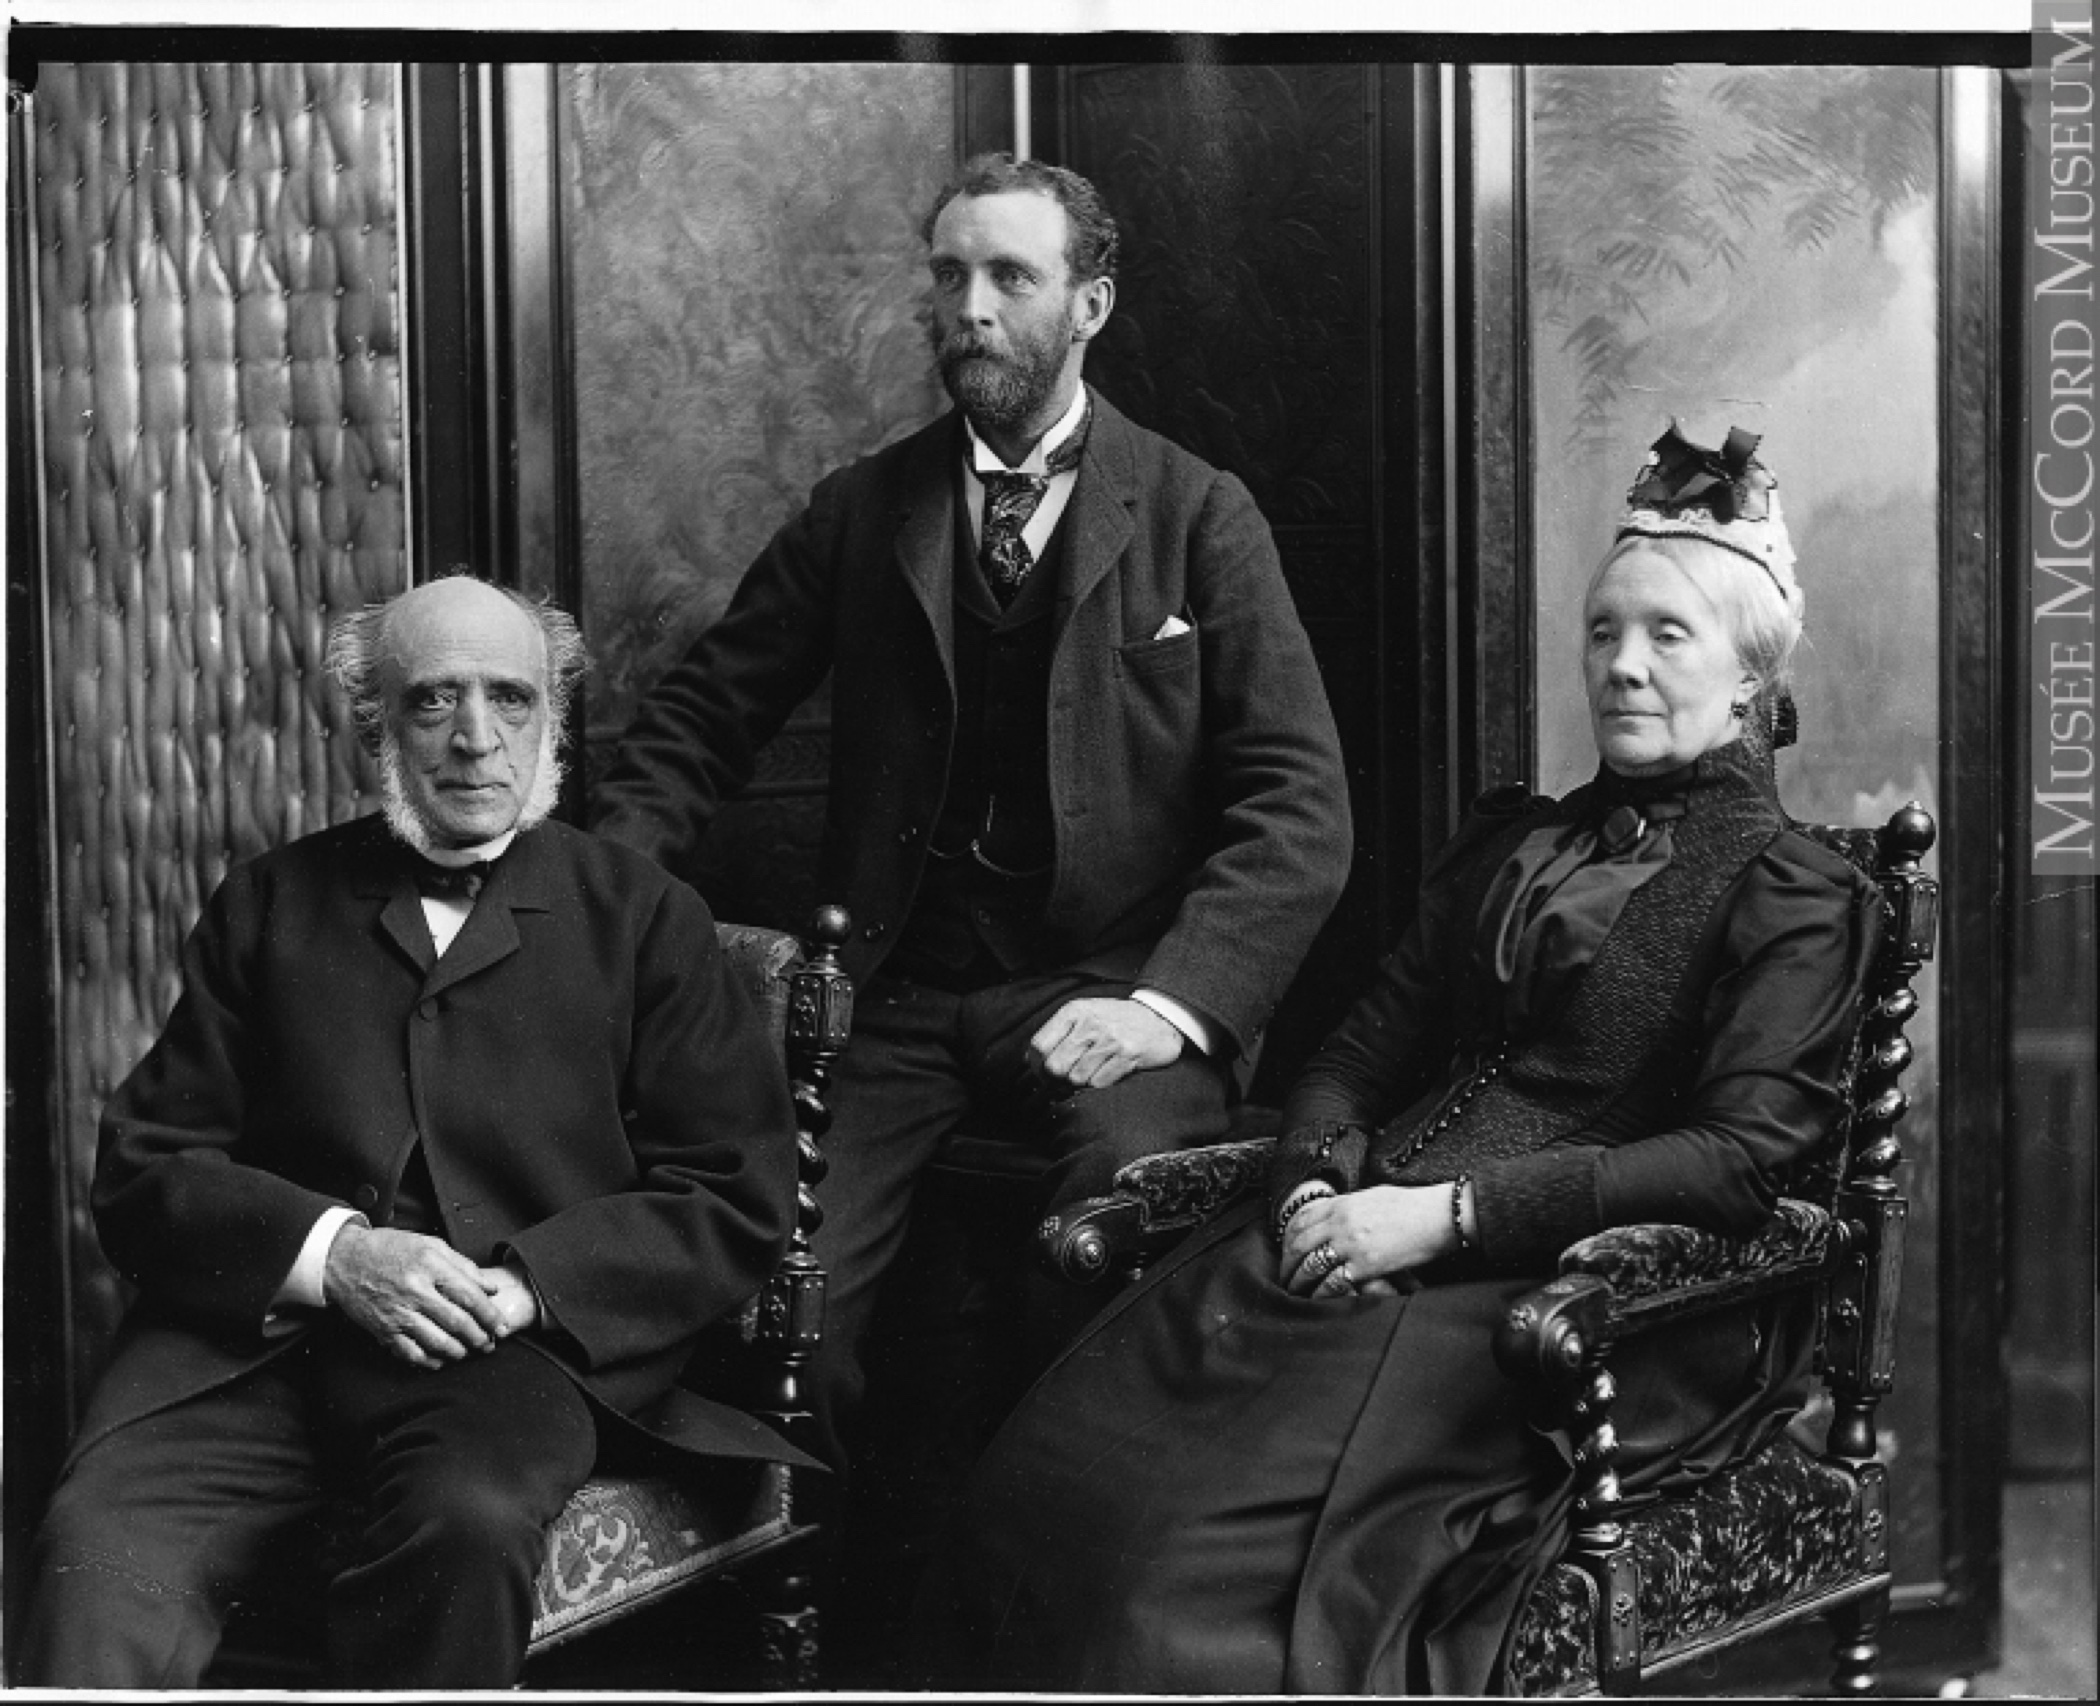 Formal black and white photo of three seated people (William C. Meredith, his wife Sofia Naters Holmes Meredith, and their son Henry Meredith), on elaborately carved chairs, the elderly couple in front, and the younger, bearded man seated behind them on a stool.